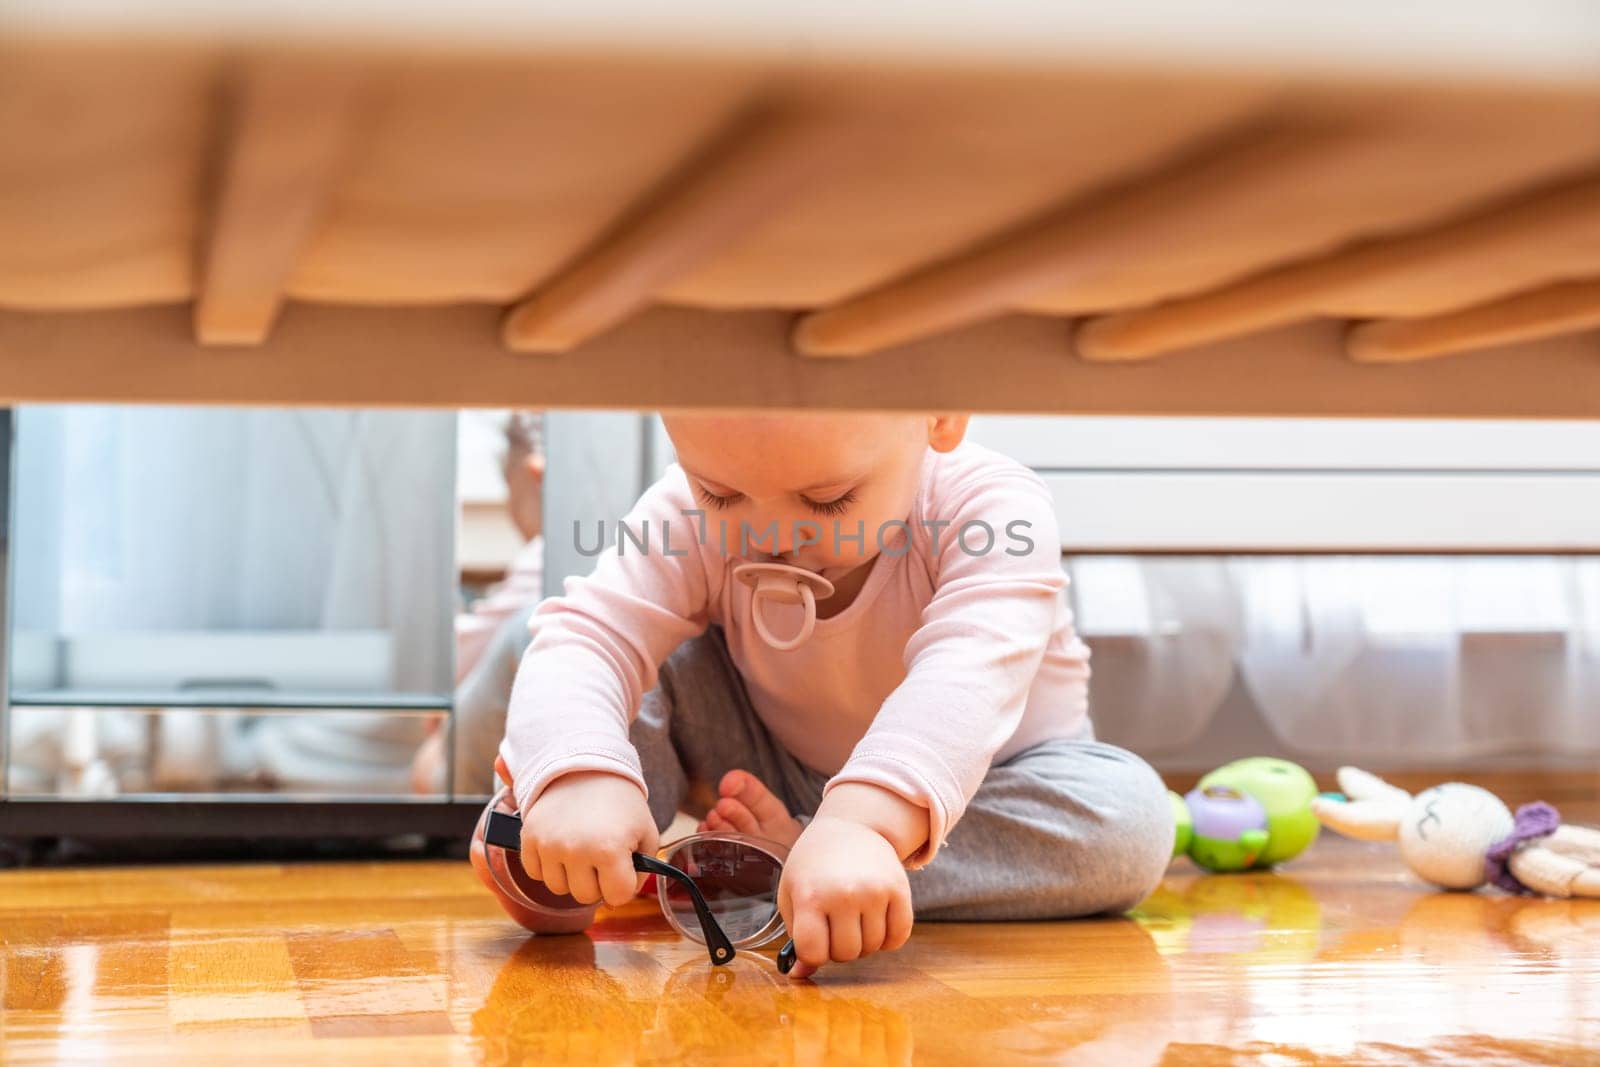 Baby with a pacifier in his mouth plays with toys, view from under the crib.